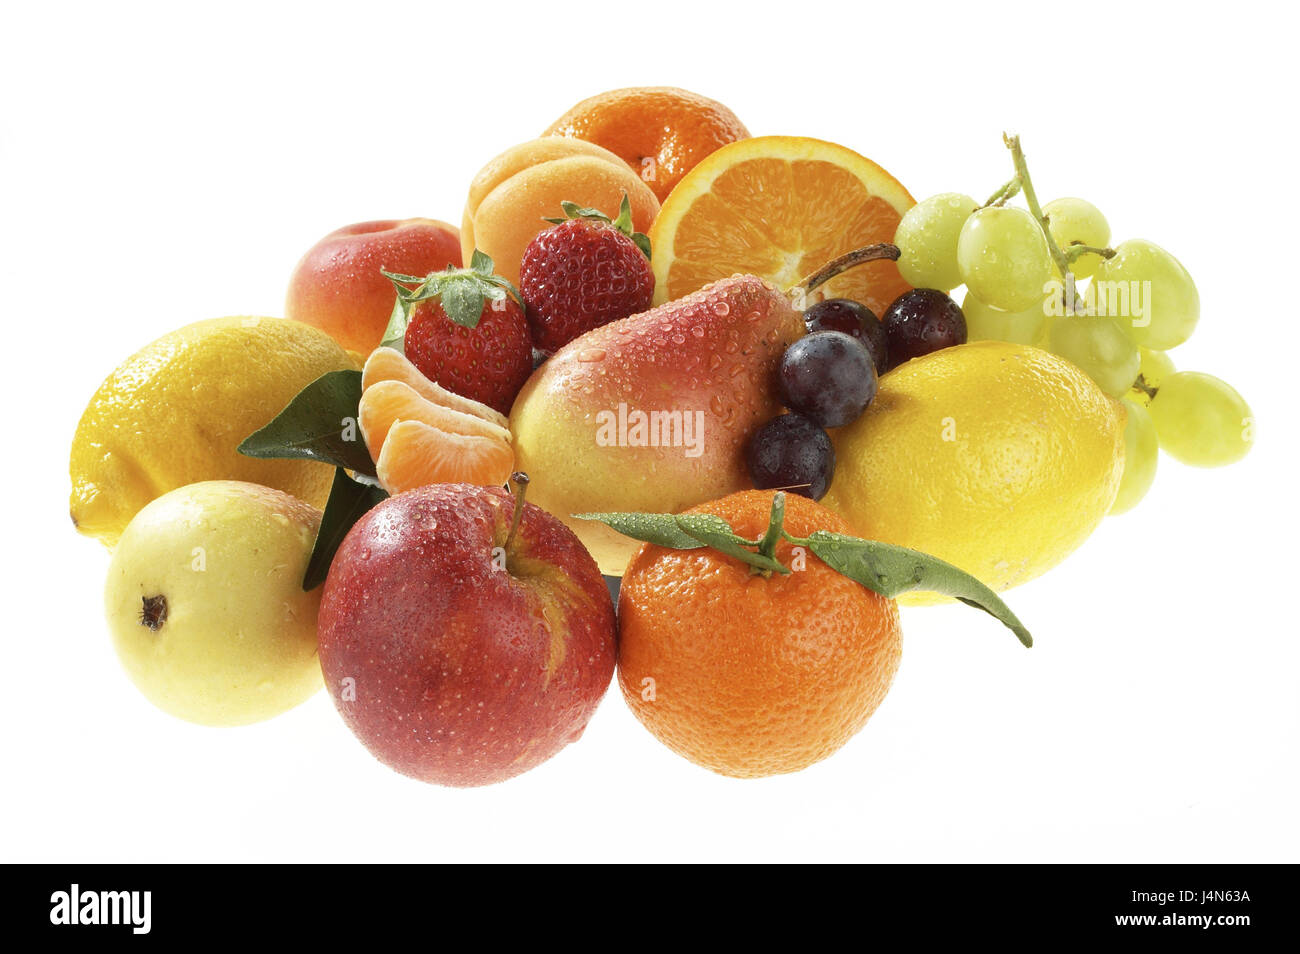 Grapes and pears Cut Out Stock Images & Pictures - Alamy